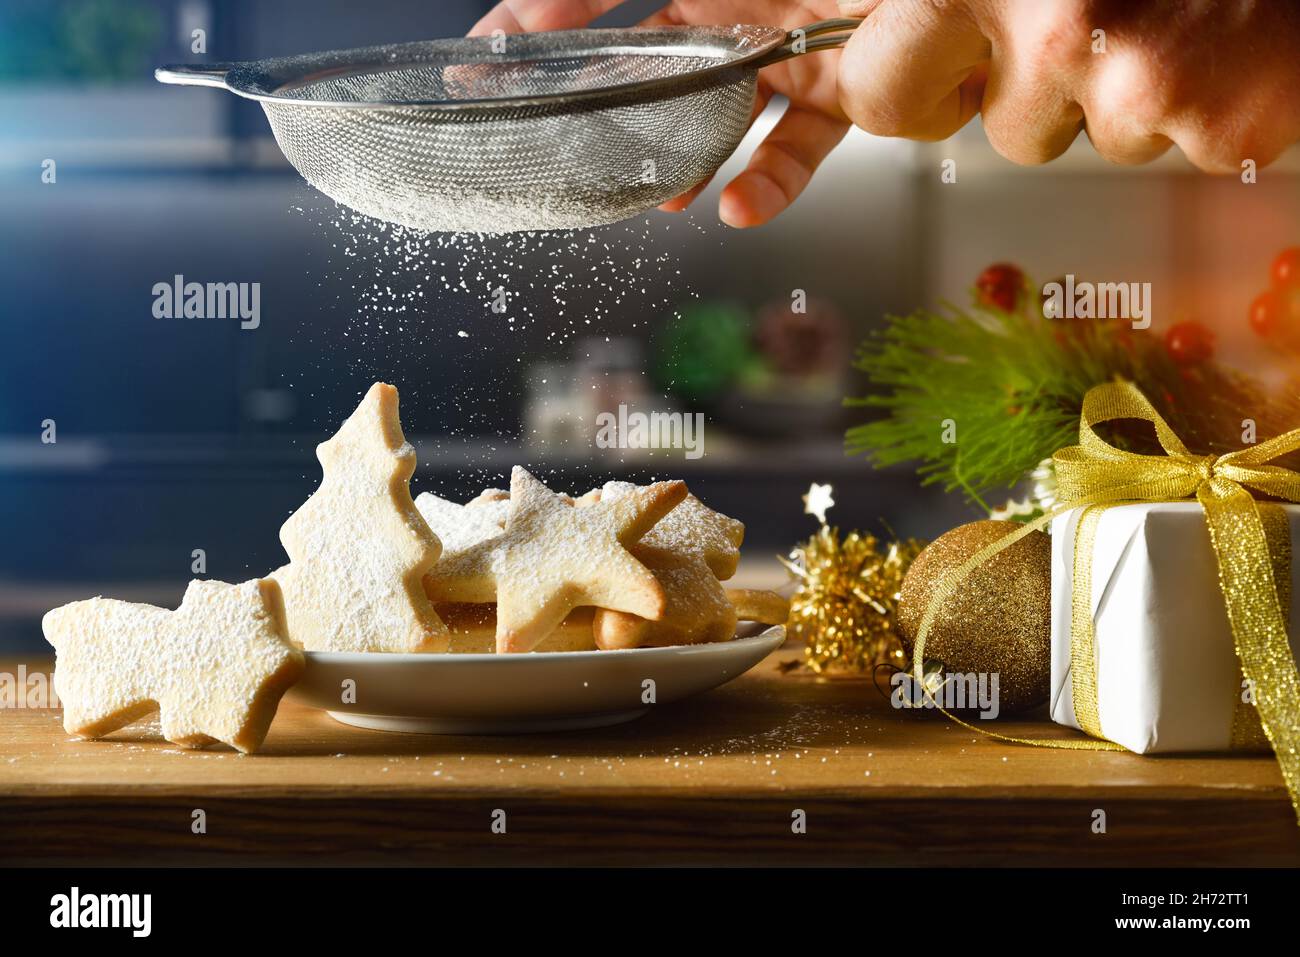 Sprinkling homemade Christmas cookies on a plate on the kitchen bench with icing sugar with a kitchen sieve. Front view. Horizontal composition. Stock Photo